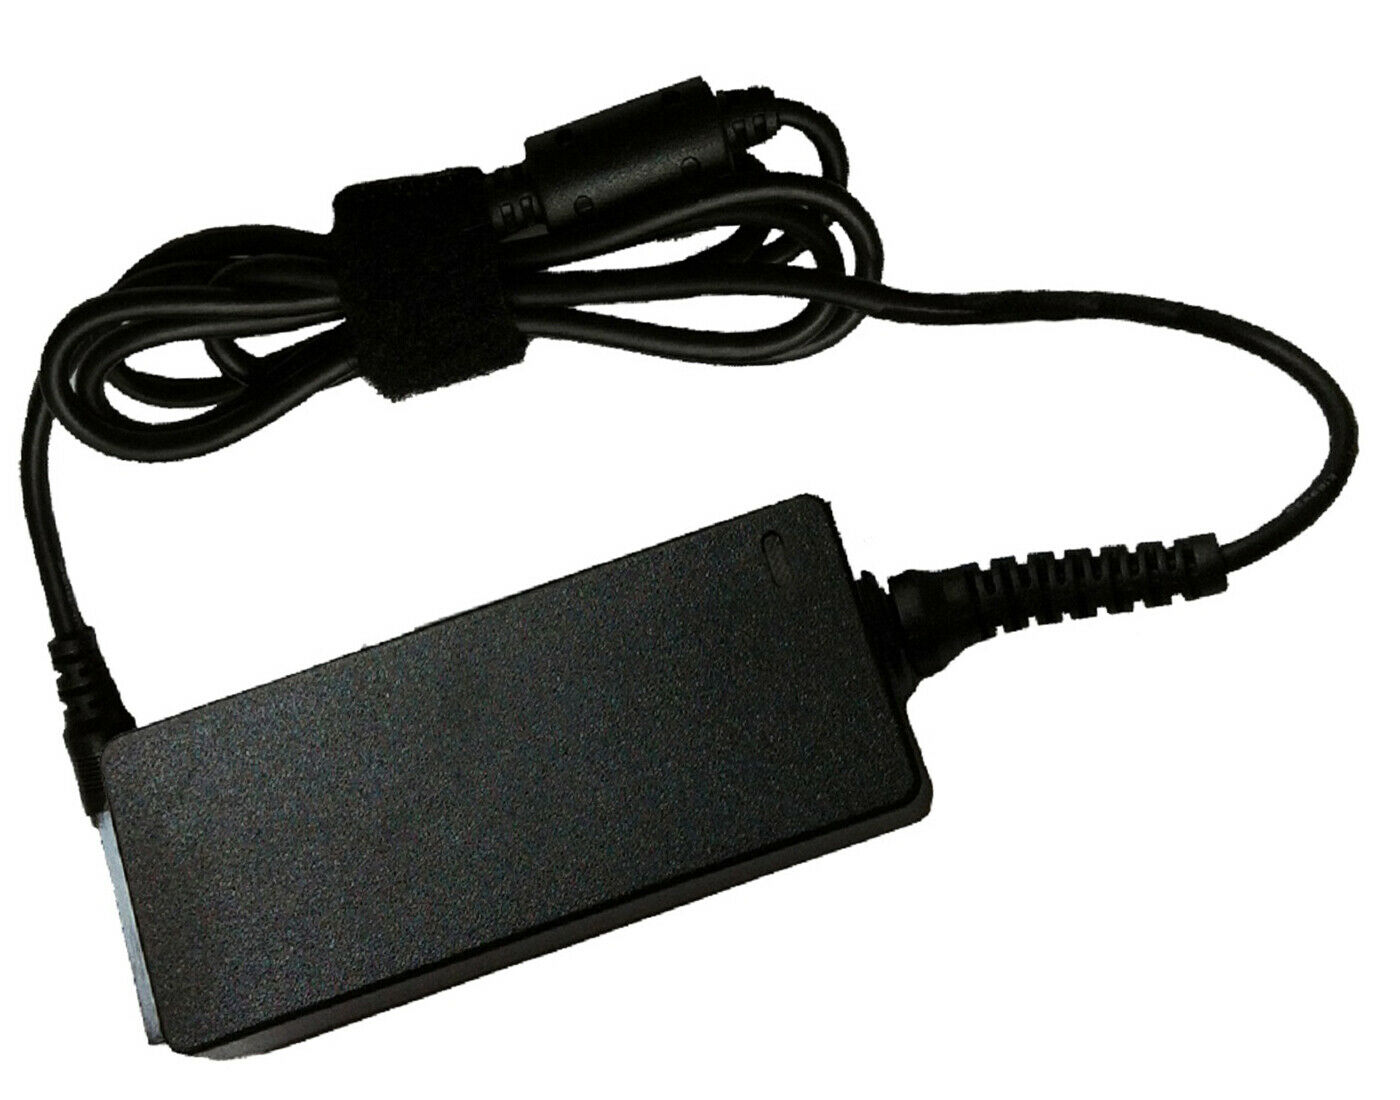 AC Adapter For Boston Acoustics TVee 10 TVEEM10B teevee Soundbar DC Power Supply Please Bear in Mind The pictures for